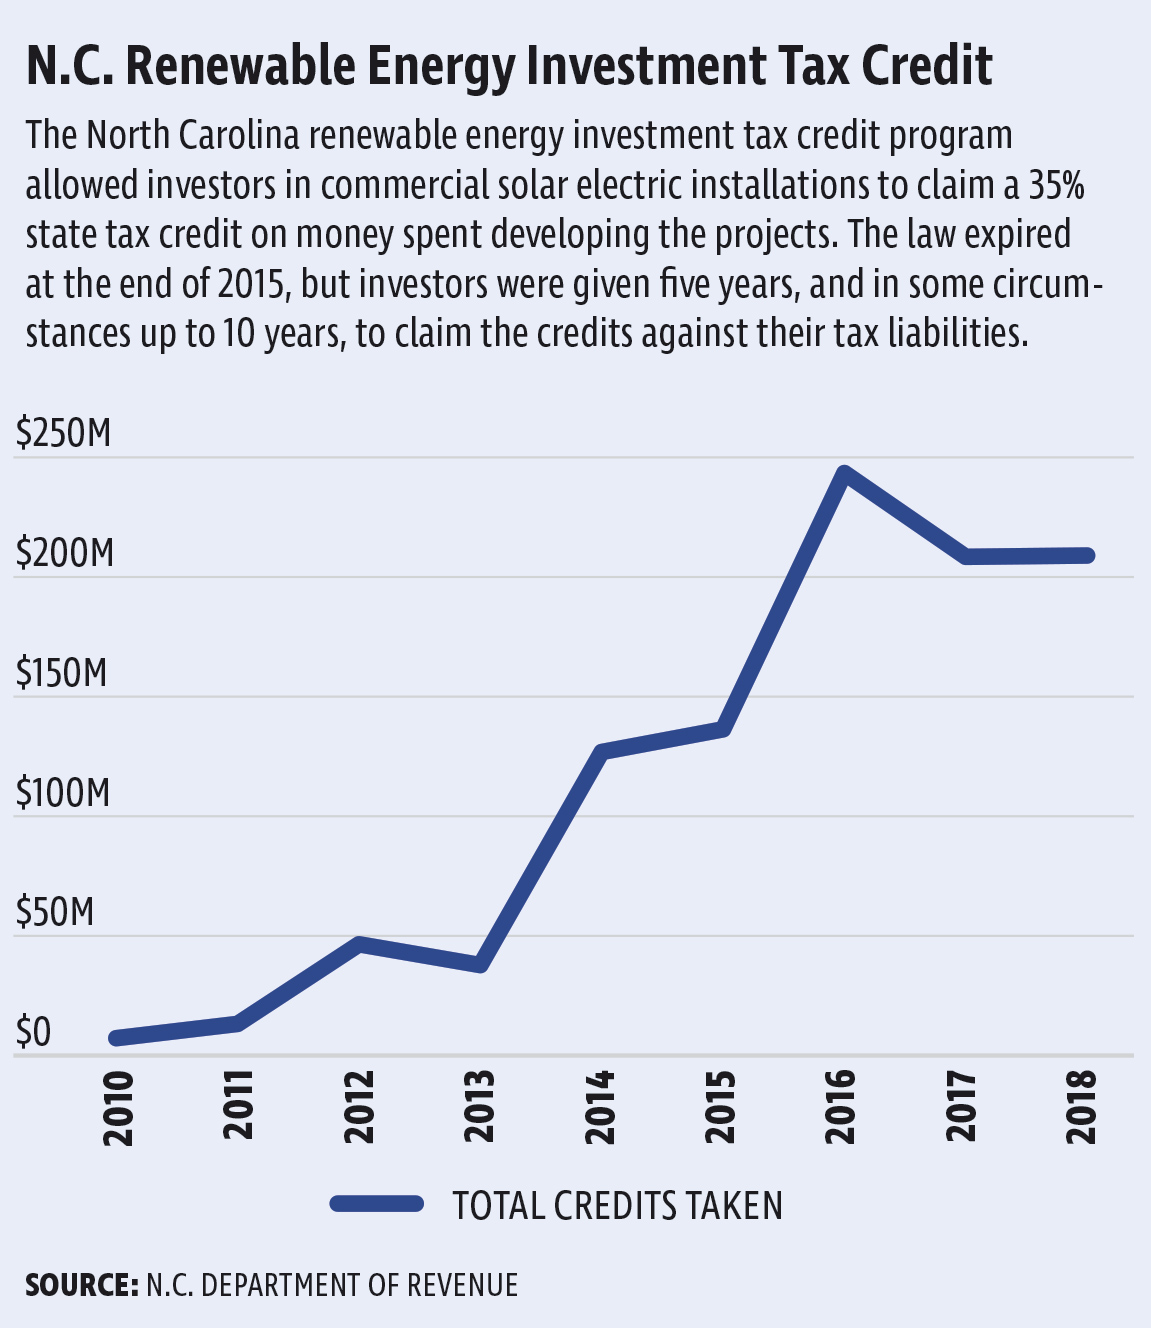 n-c-has-issued-more-than-1-billion-in-renewable-energy-tax-credits